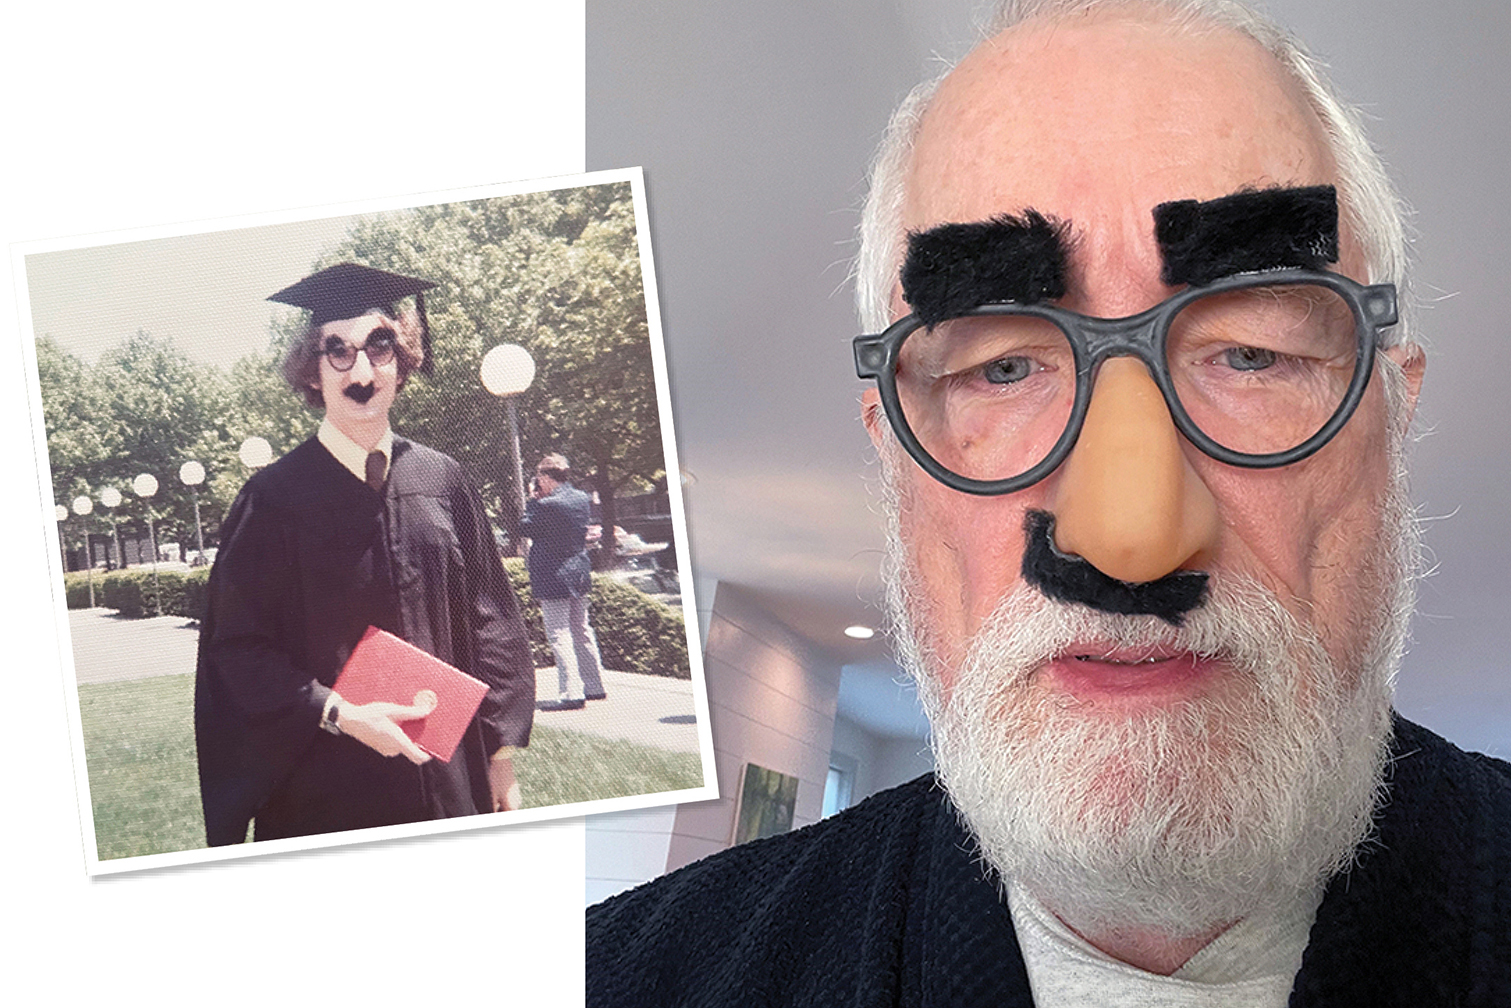 A photo collage with two photos of MIT alum Alan Paul Lehotsky, left an old photo at MIT's graduation wearing Groucho glasses, and right him today wearing the same glasses